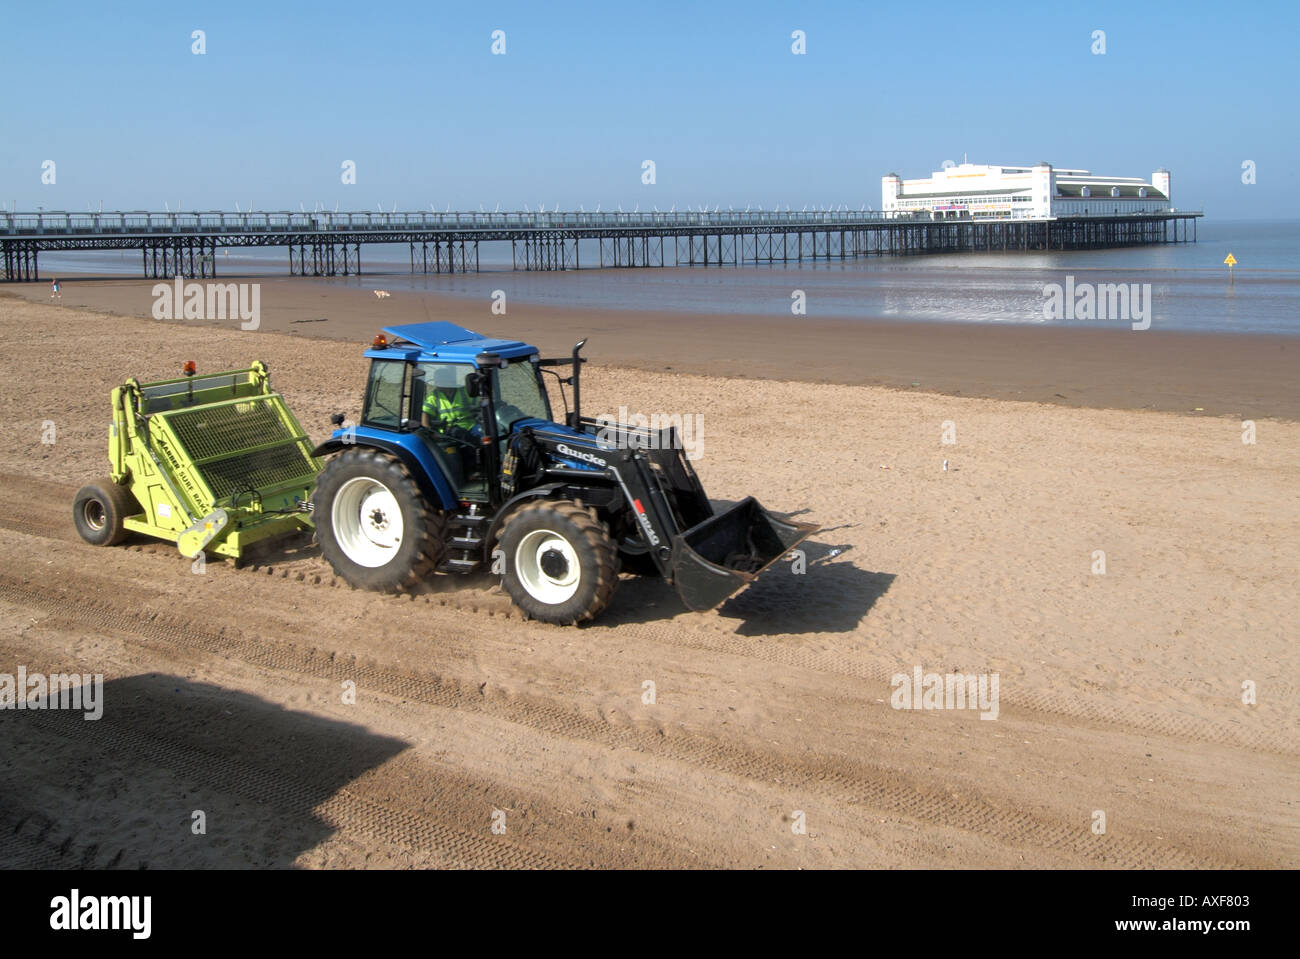 Weston Super Mare beach early morning tractor pulling litter collecting machine across sand before visitors arrive pier beyond Stock Photo